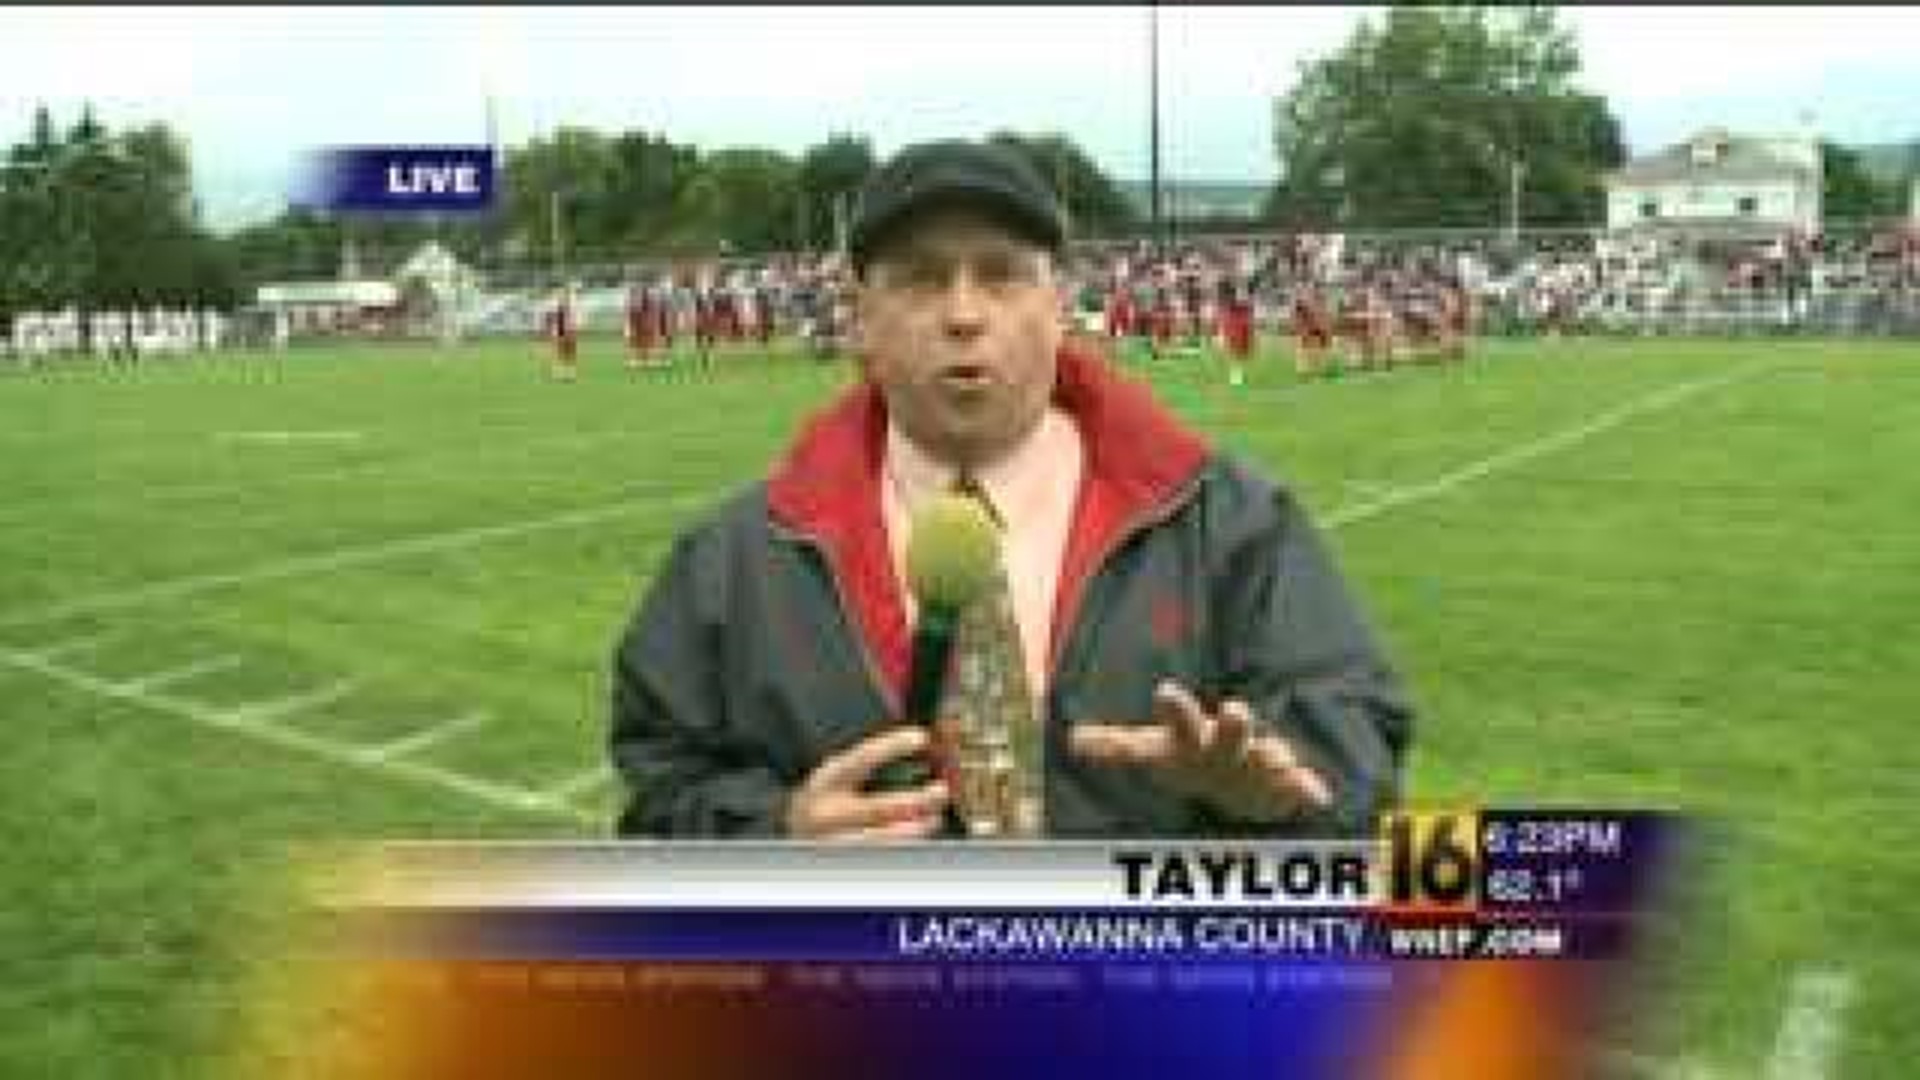 6pm Sports Live Shot In Taylor